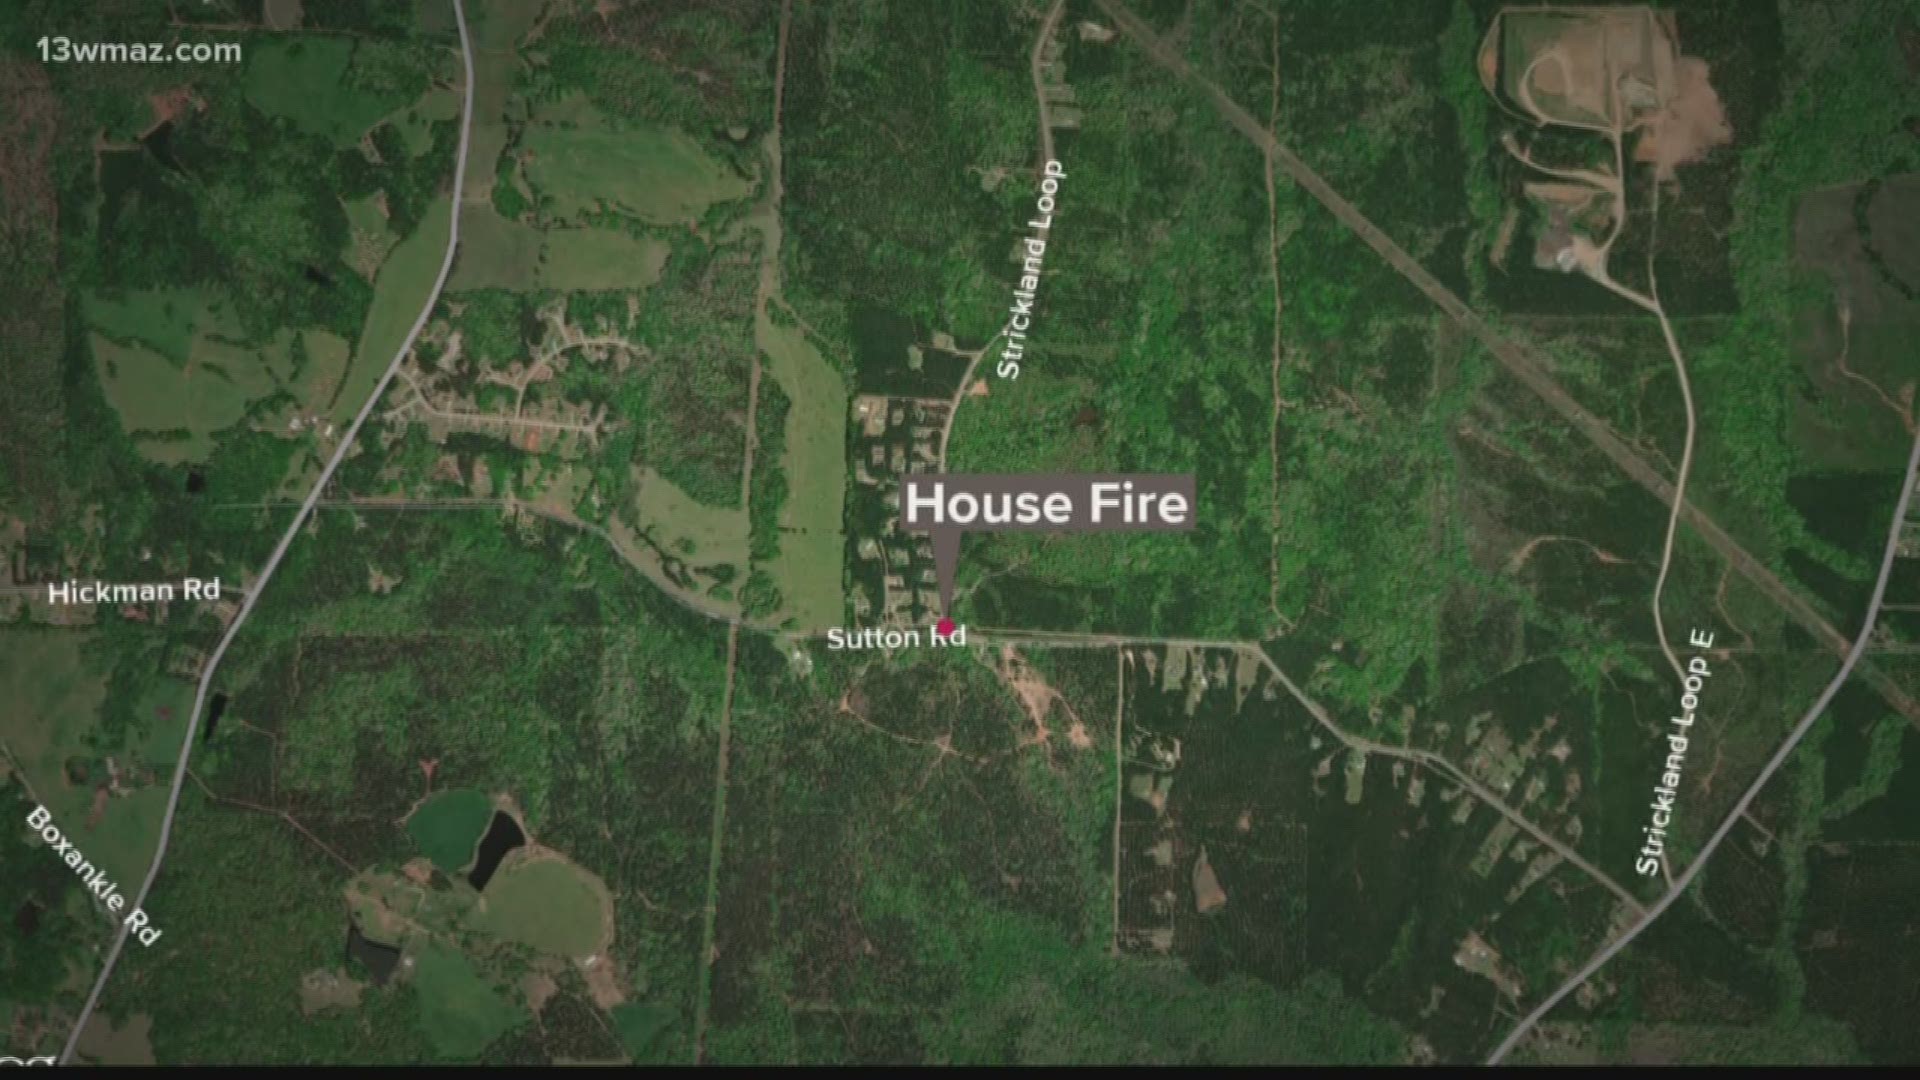 An elderly couple died Saturday night after a house fire just outside of Forsyth, Ga. The cause is still under investigation.